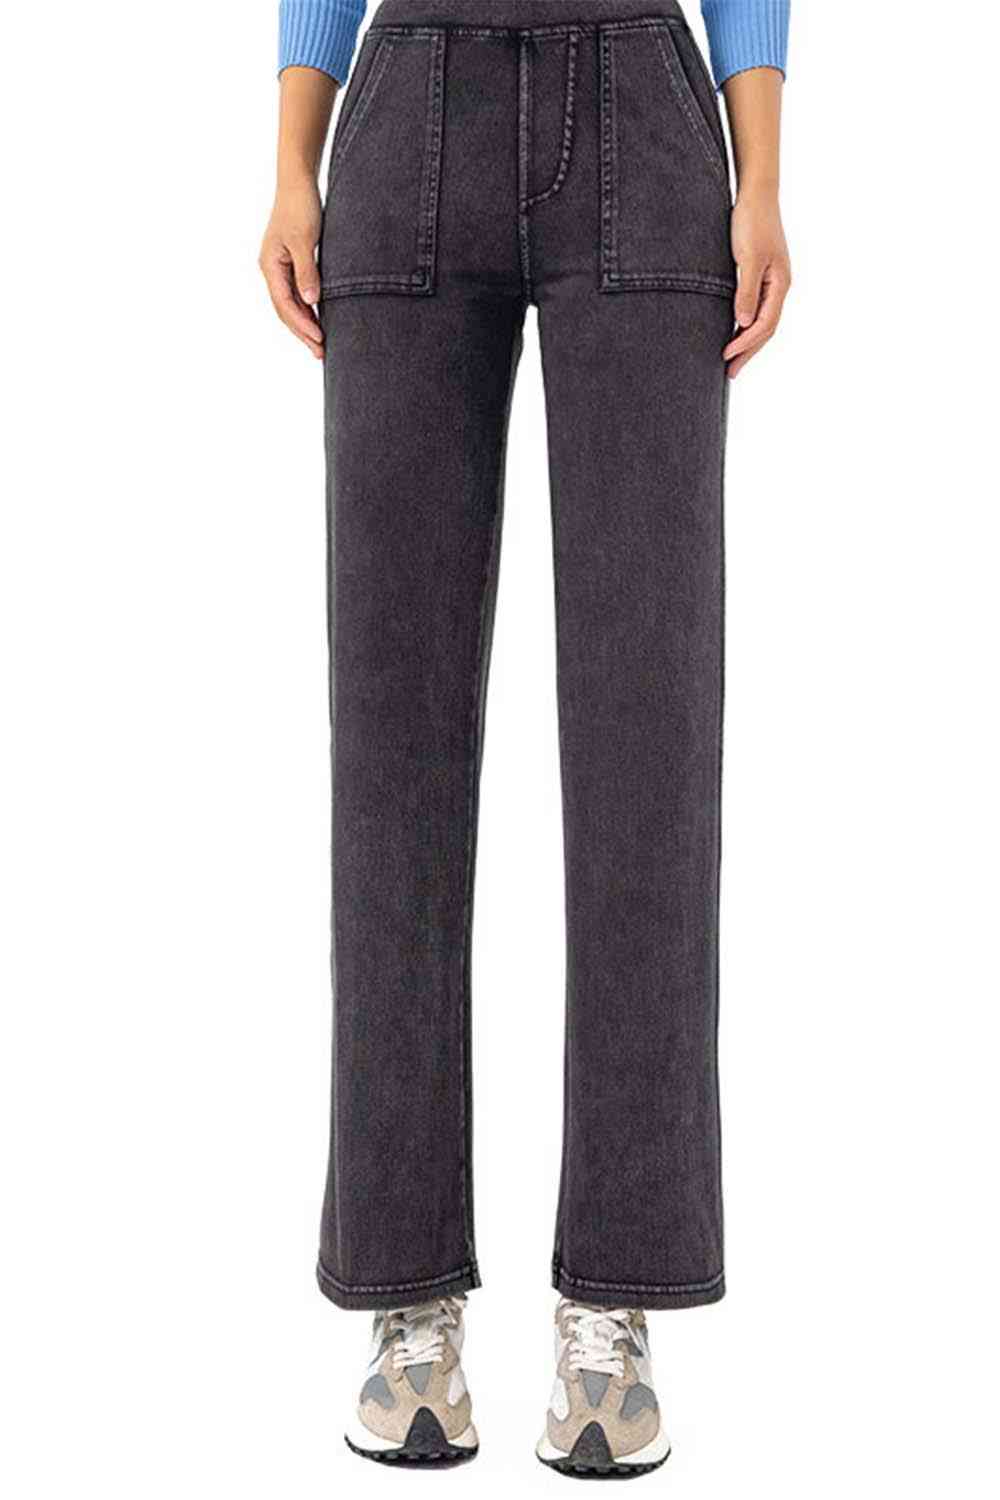 3 Colors - Pocketed Long Jeans